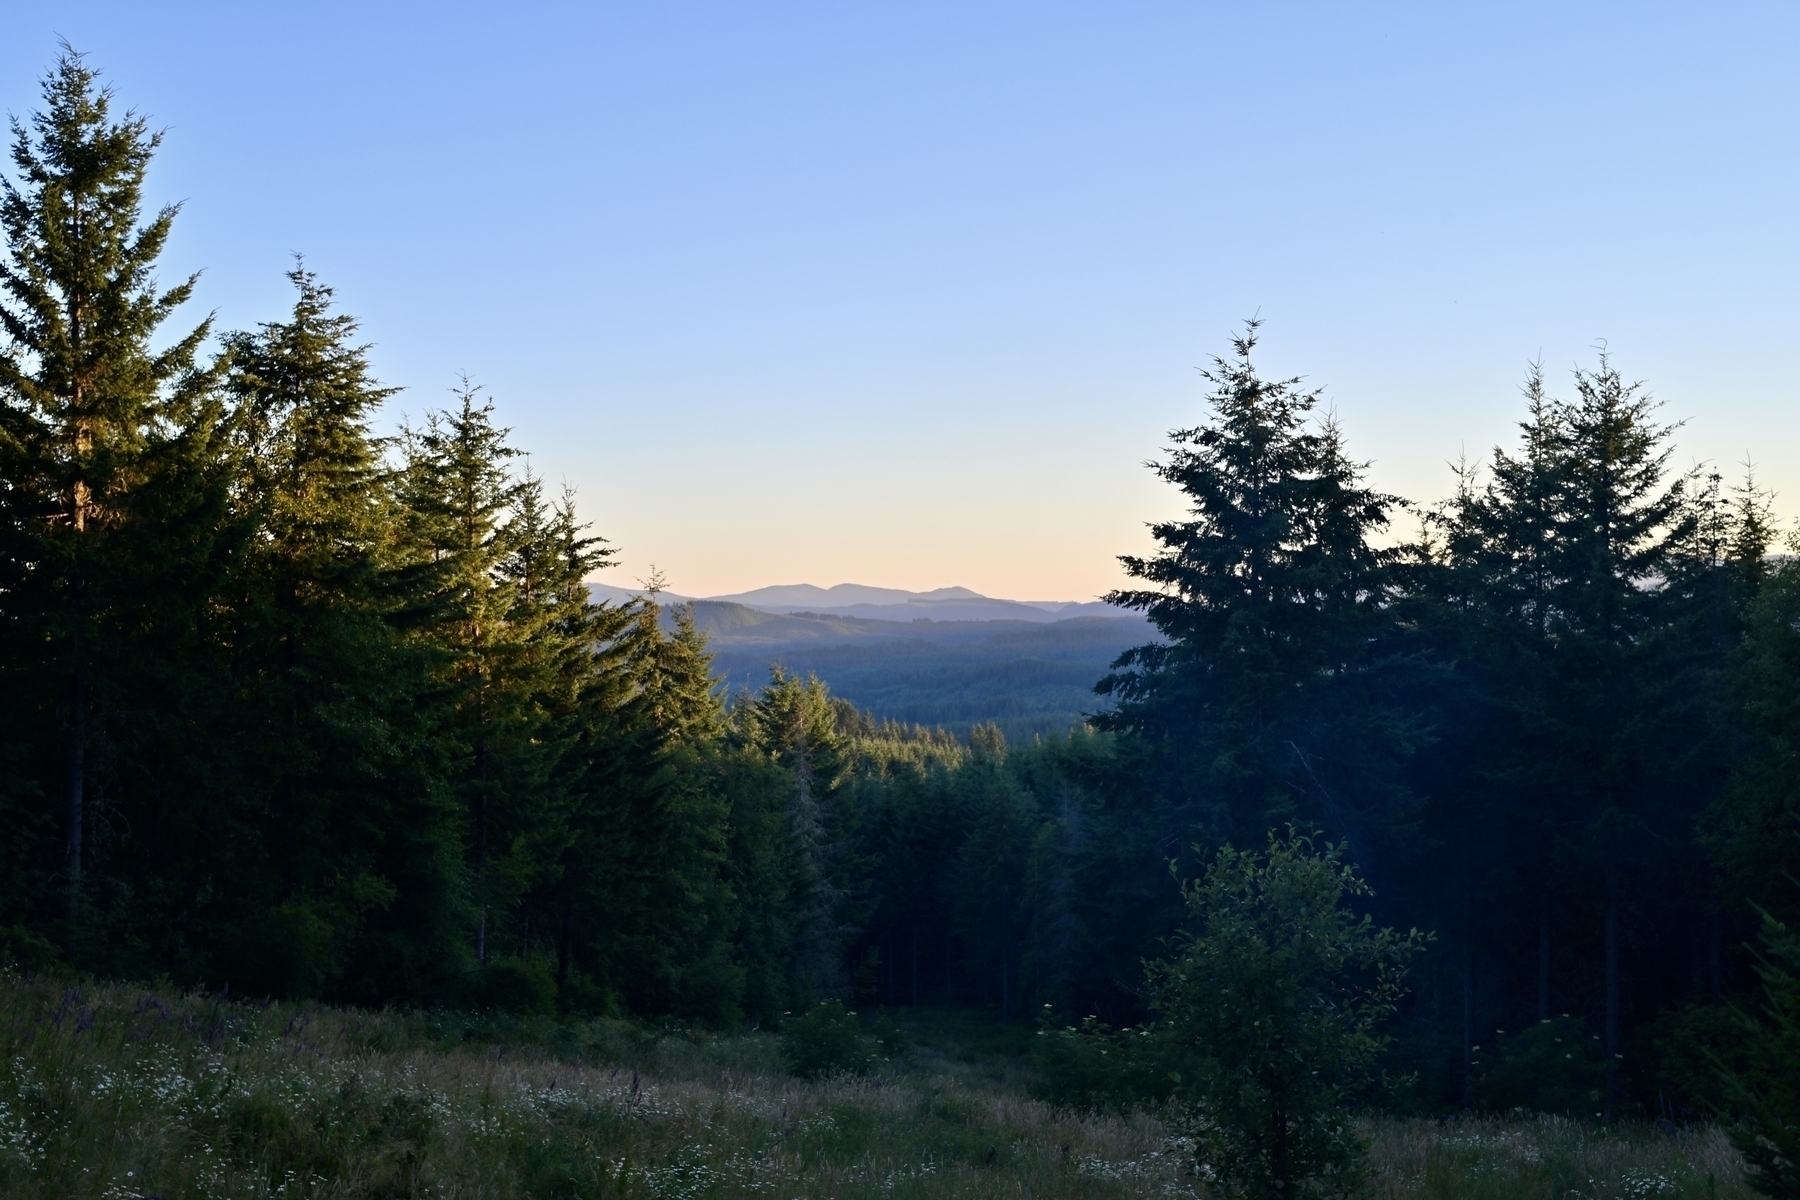 A serene landscape features a forested area with tall trees and distant mountains under a clear, twilight sky.